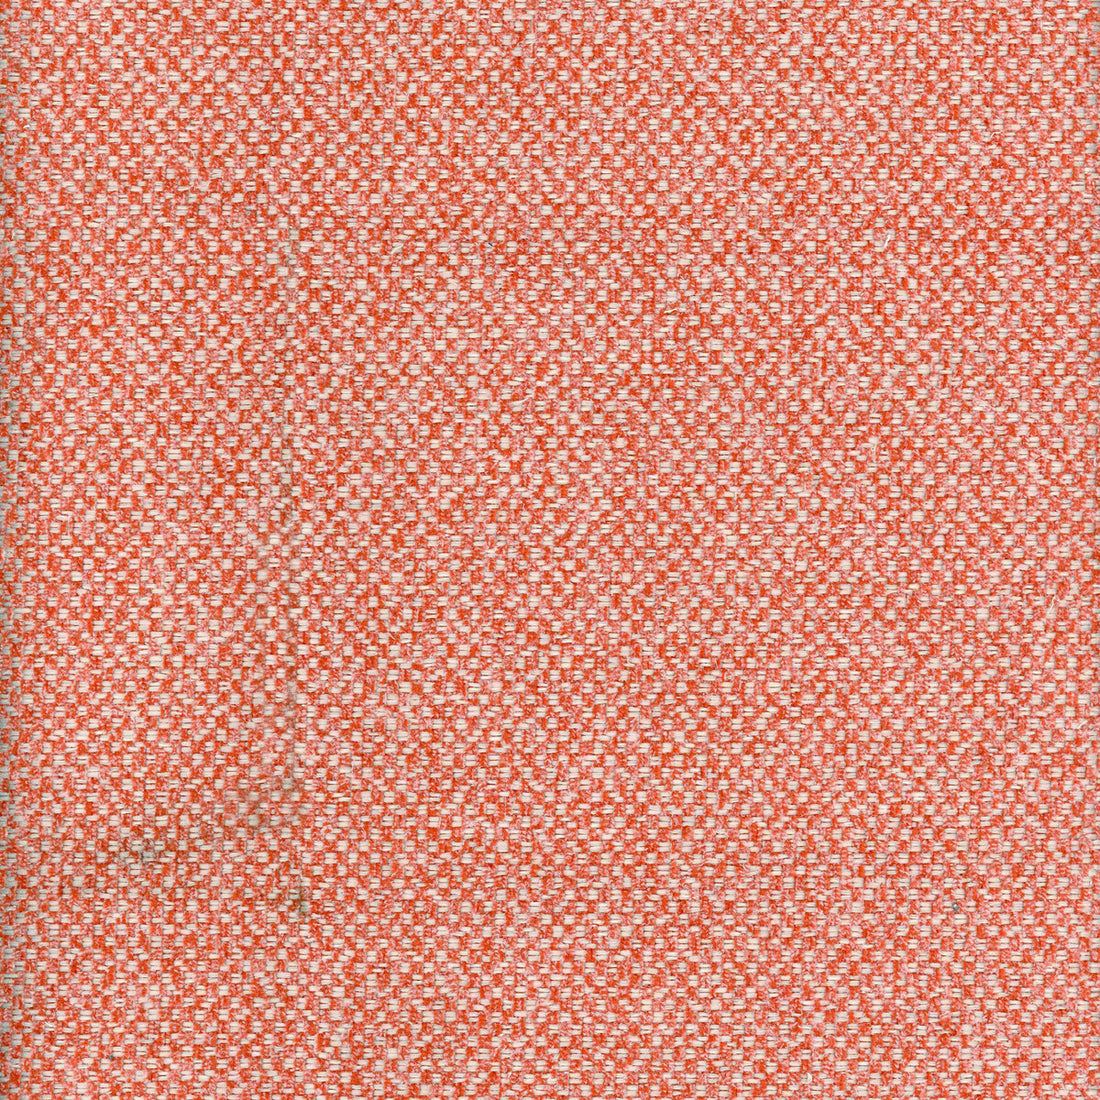 Yosemite fabric in salmon color - pattern AM100332.19.0 - by Kravet Couture in the Andrew Martin Canyon collection